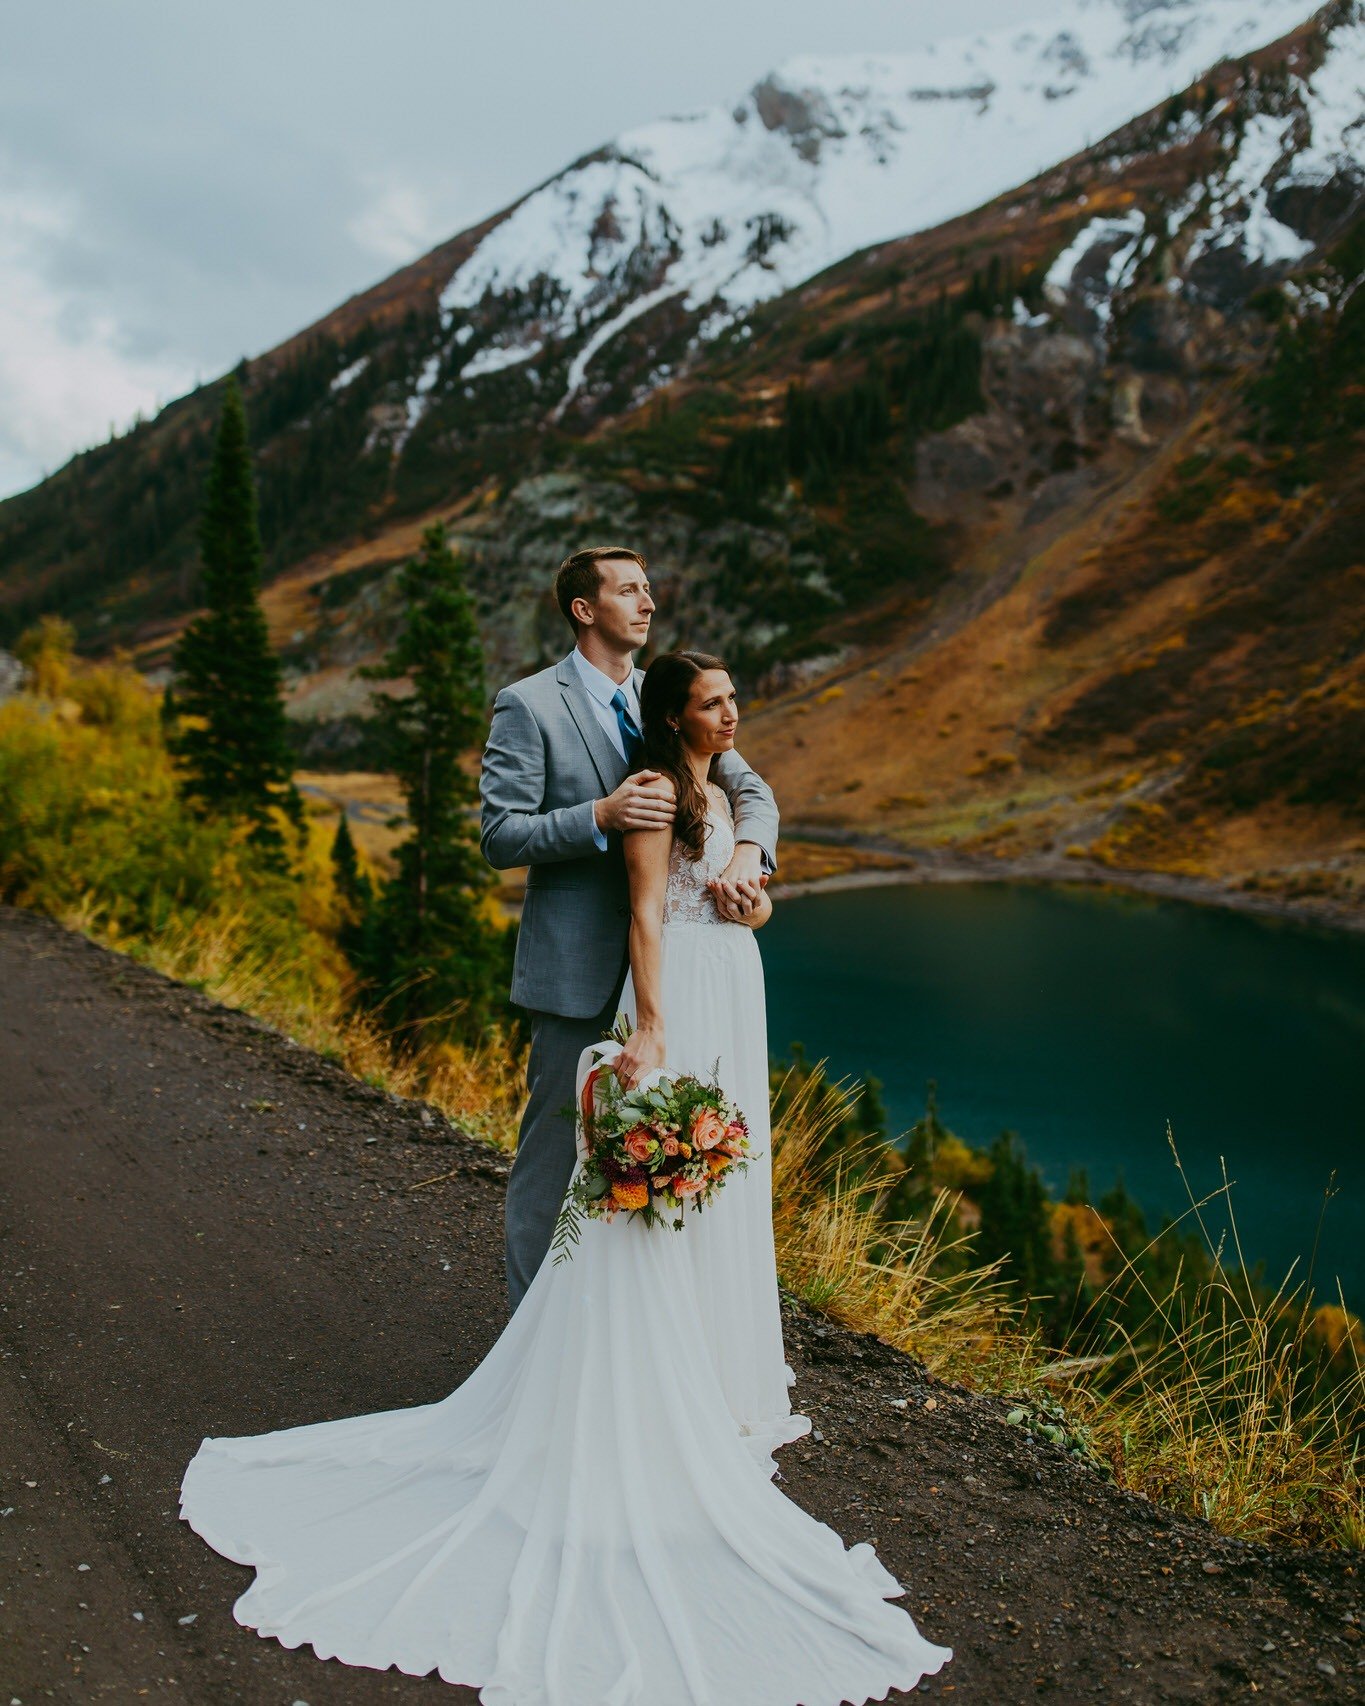 🏔 Why should I elope in Crested Butte? 🏔

I like to consider myself a bit of an expert when it comes to Crested Butte. A large majority of my couples have eloped here, and I even eloped here myself in 2021!

Anyone who has been to Crested Butte kno